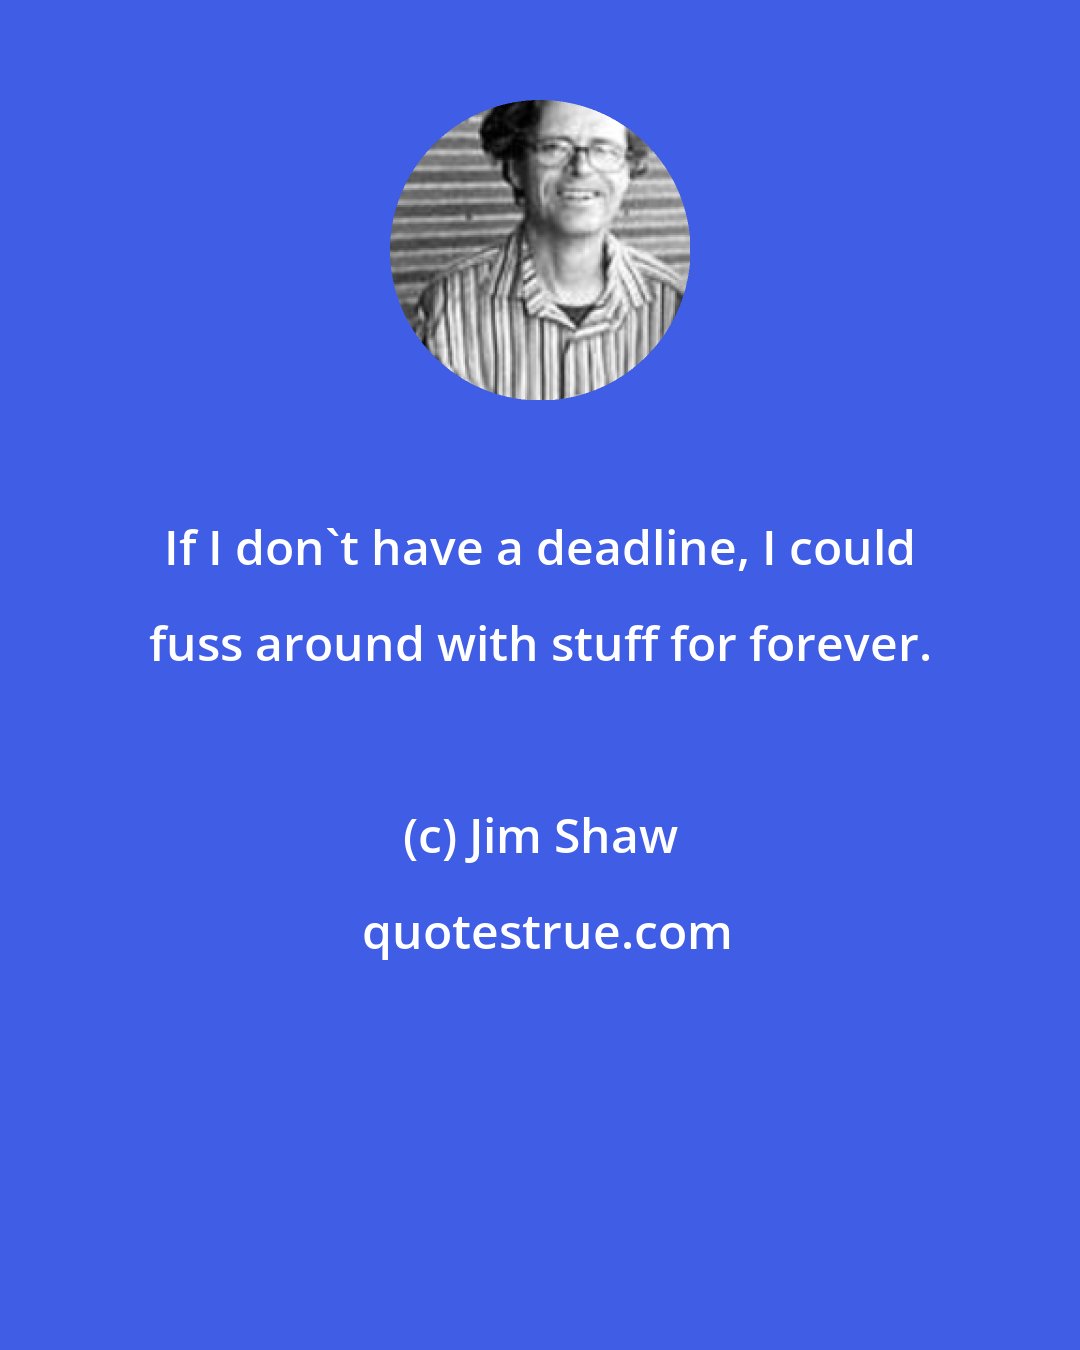 Jim Shaw: If I don't have a deadline, I could fuss around with stuff for forever.